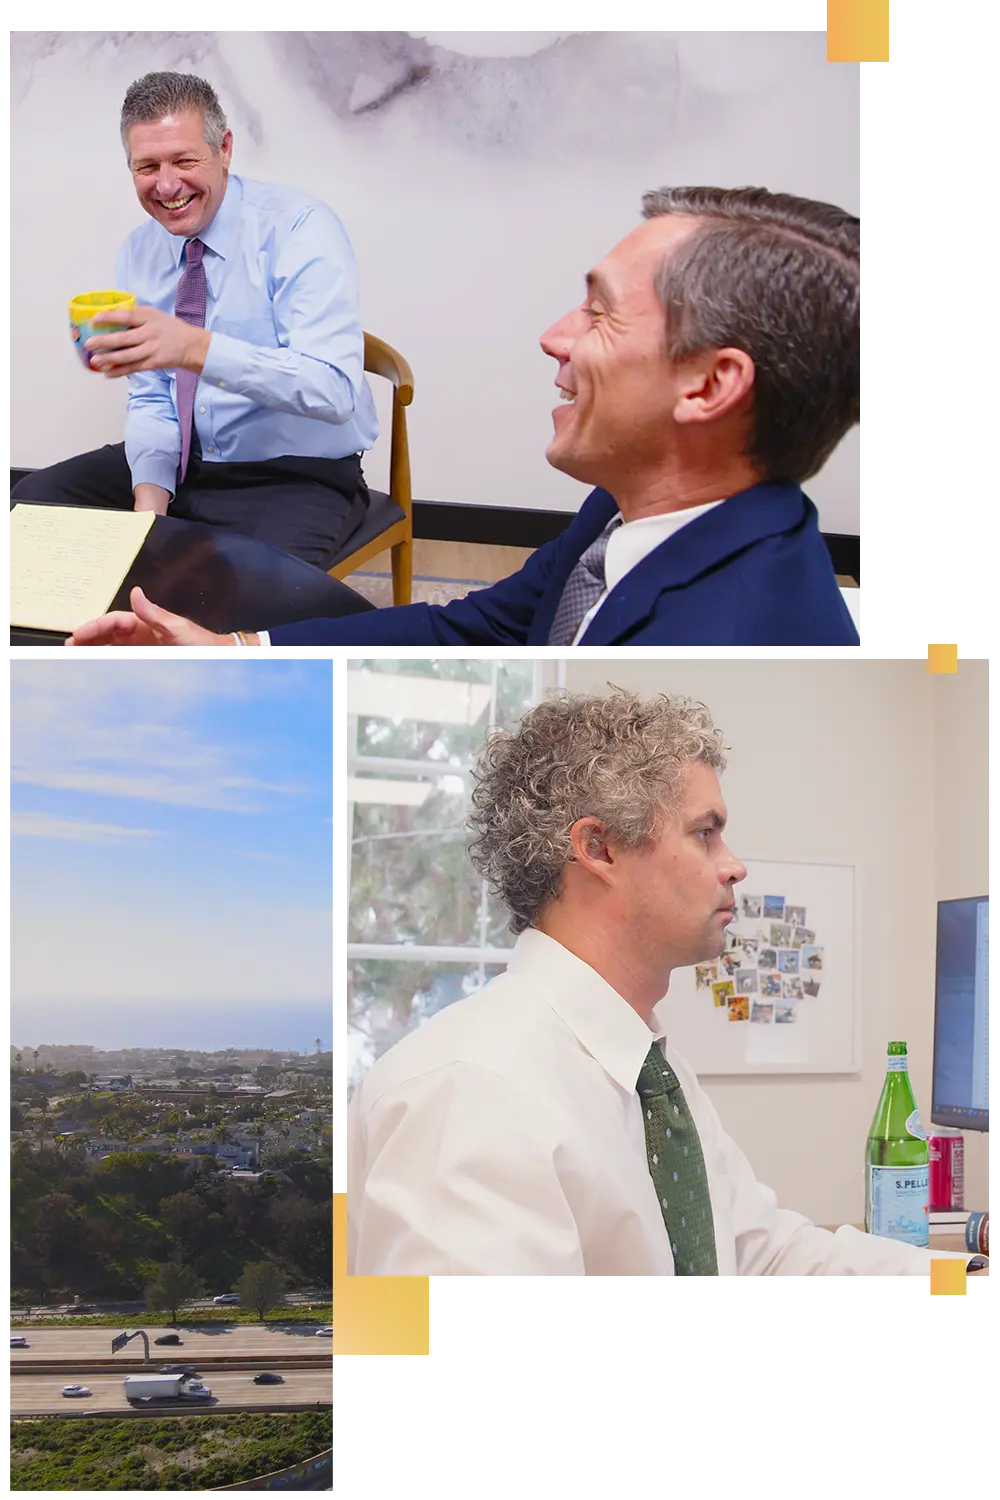 A photo collage of Partners Chris Dryden and James Huber of Global Legal Law Firm, Located in beautiful San Diego, CA.